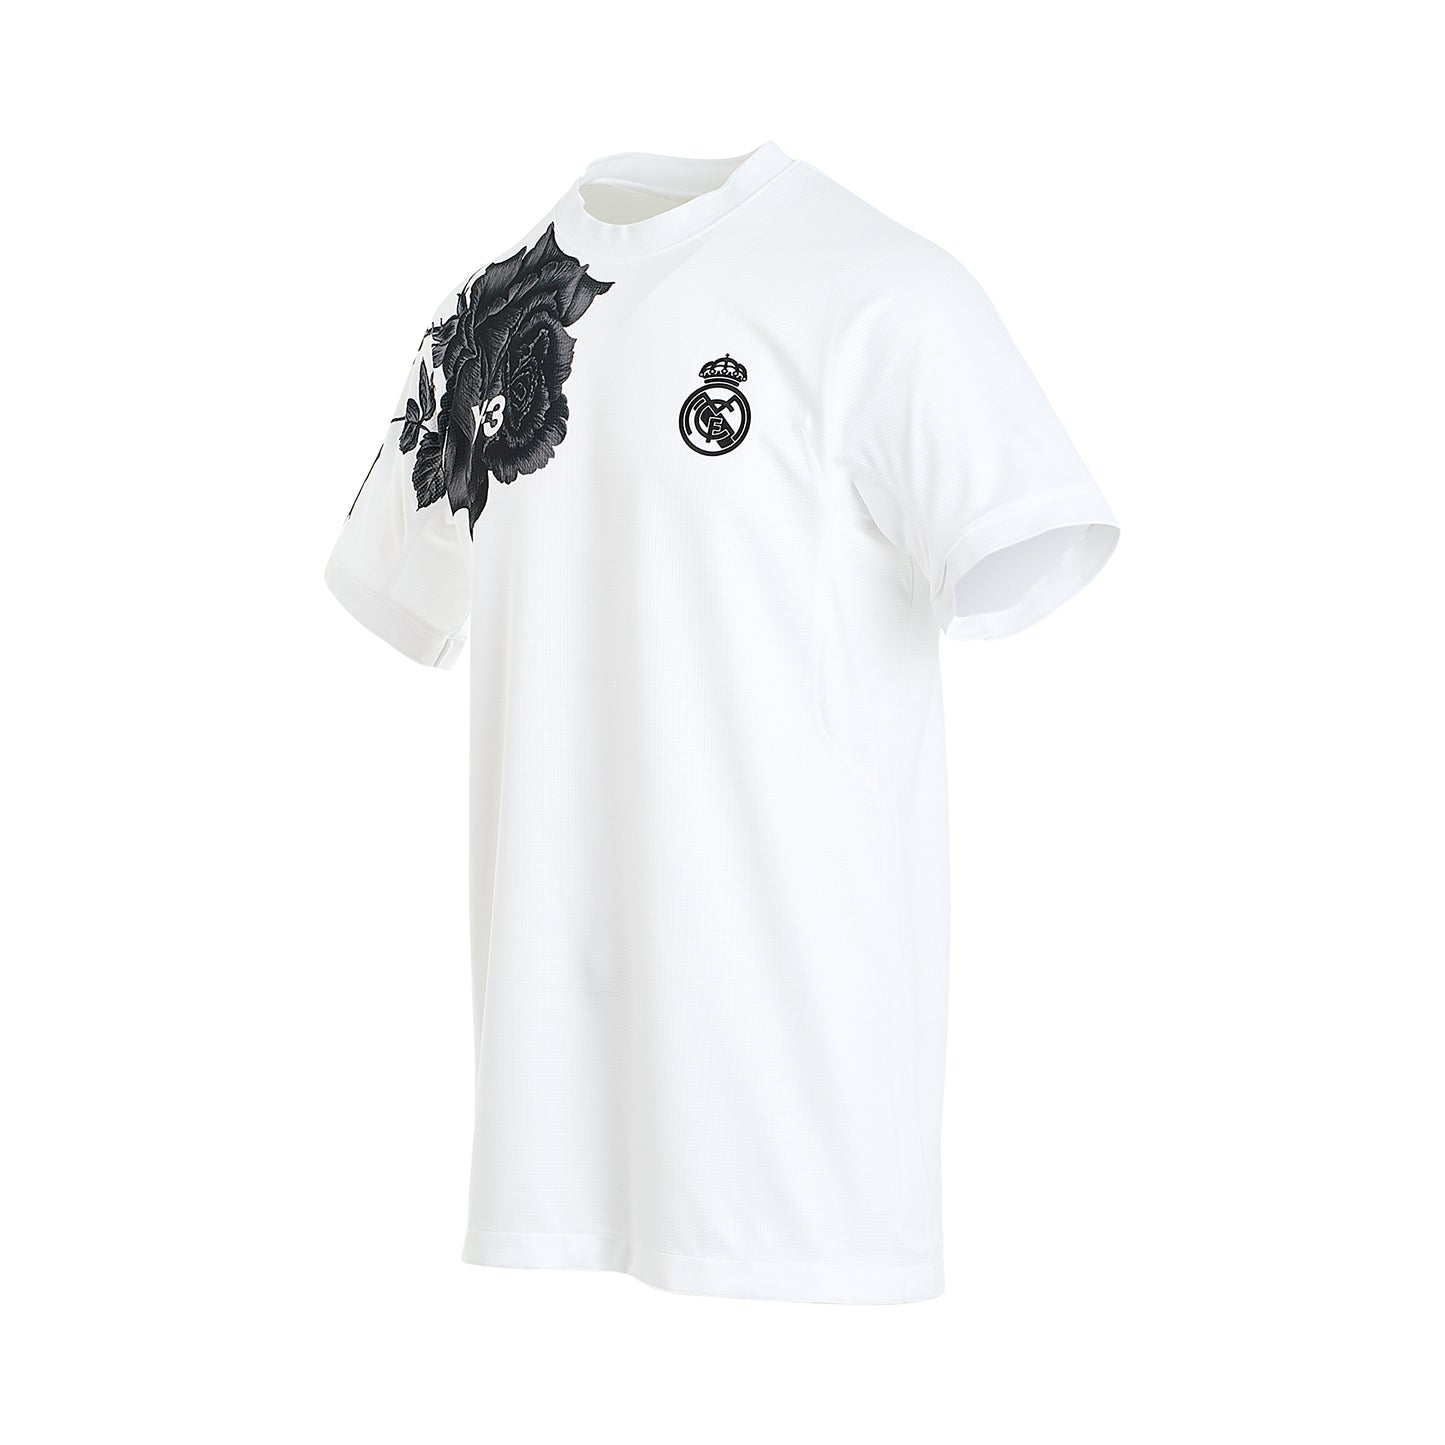 Y-3 X Real Madrid Match Jersey in White